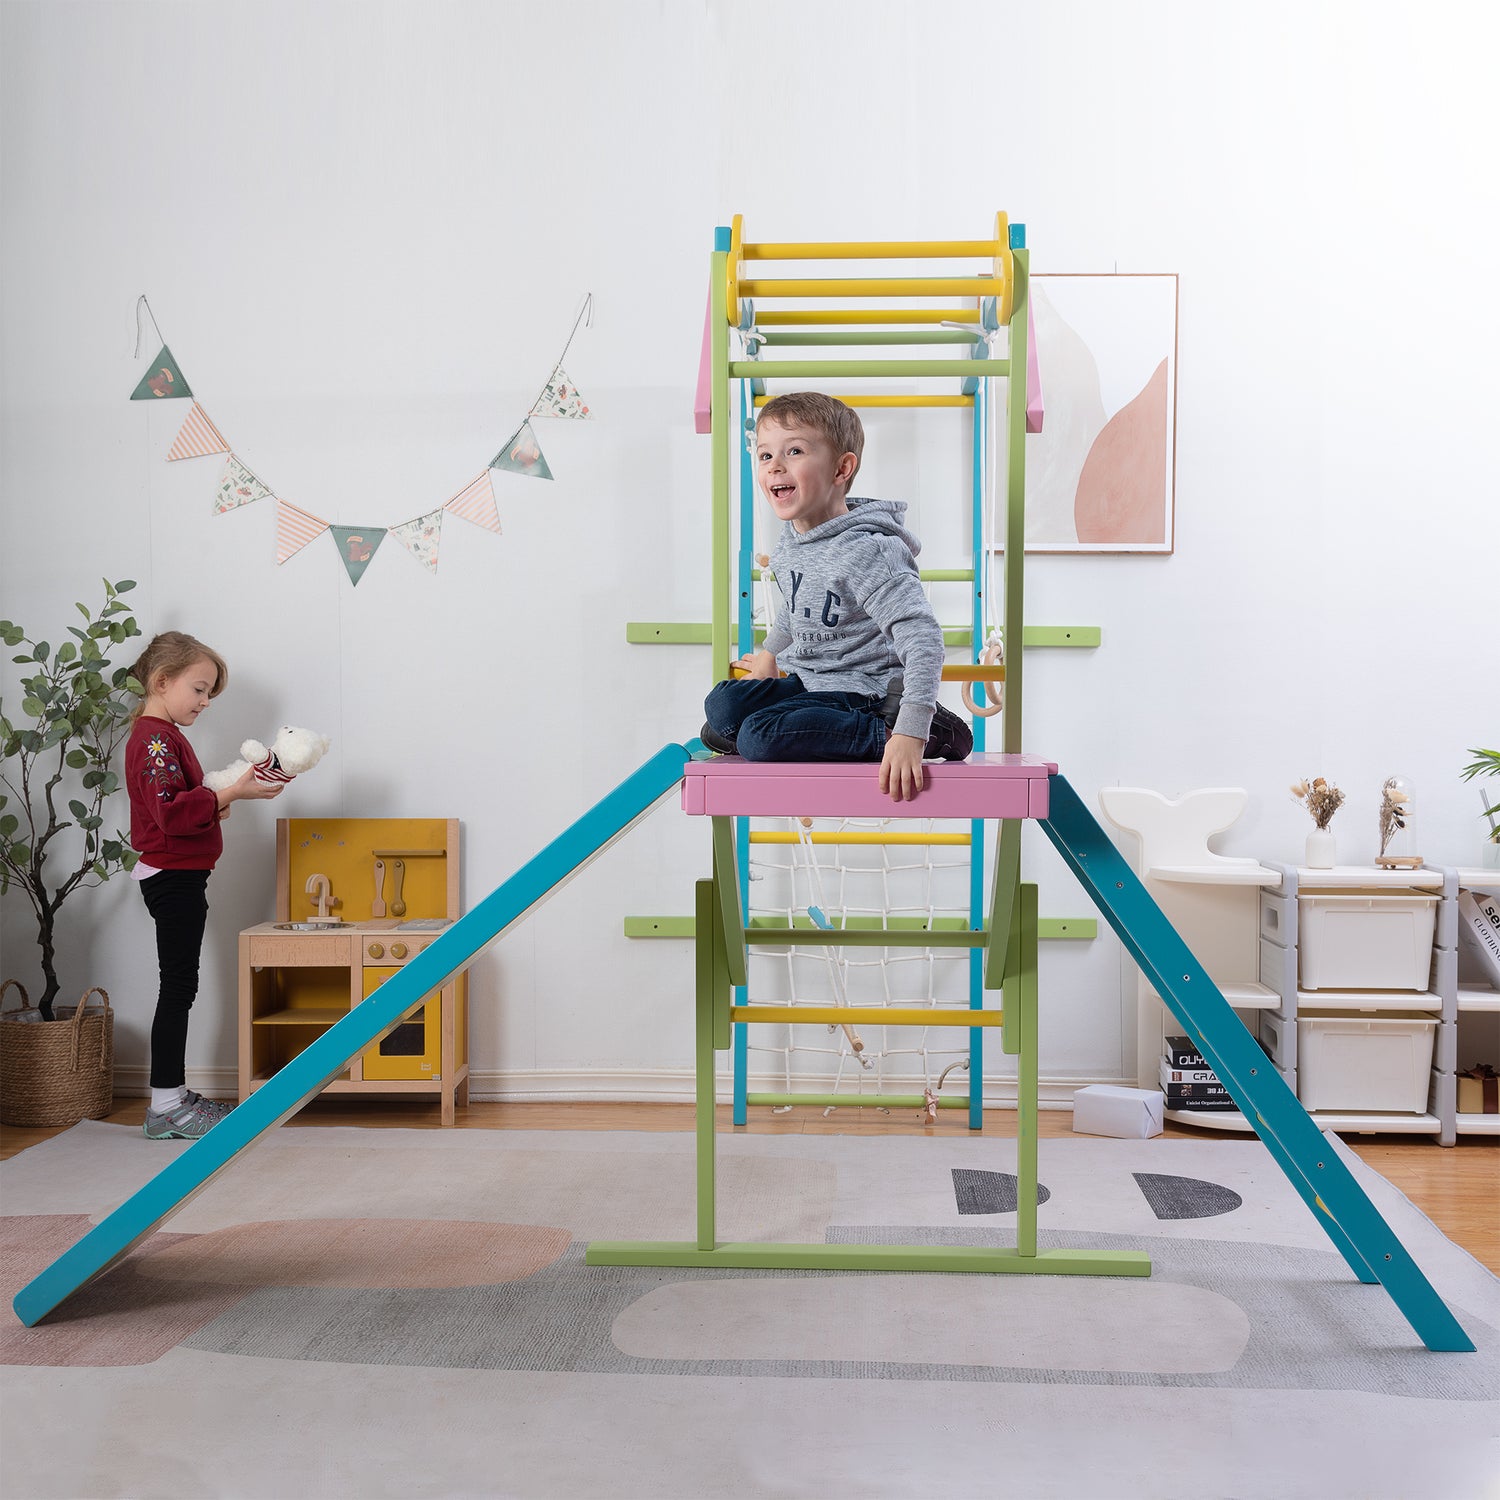 Children Playing on The Grove Jungle Gym - Avenlur's Premium 8 in 1 Wooden Playset for Older Kids - Colorful Edition